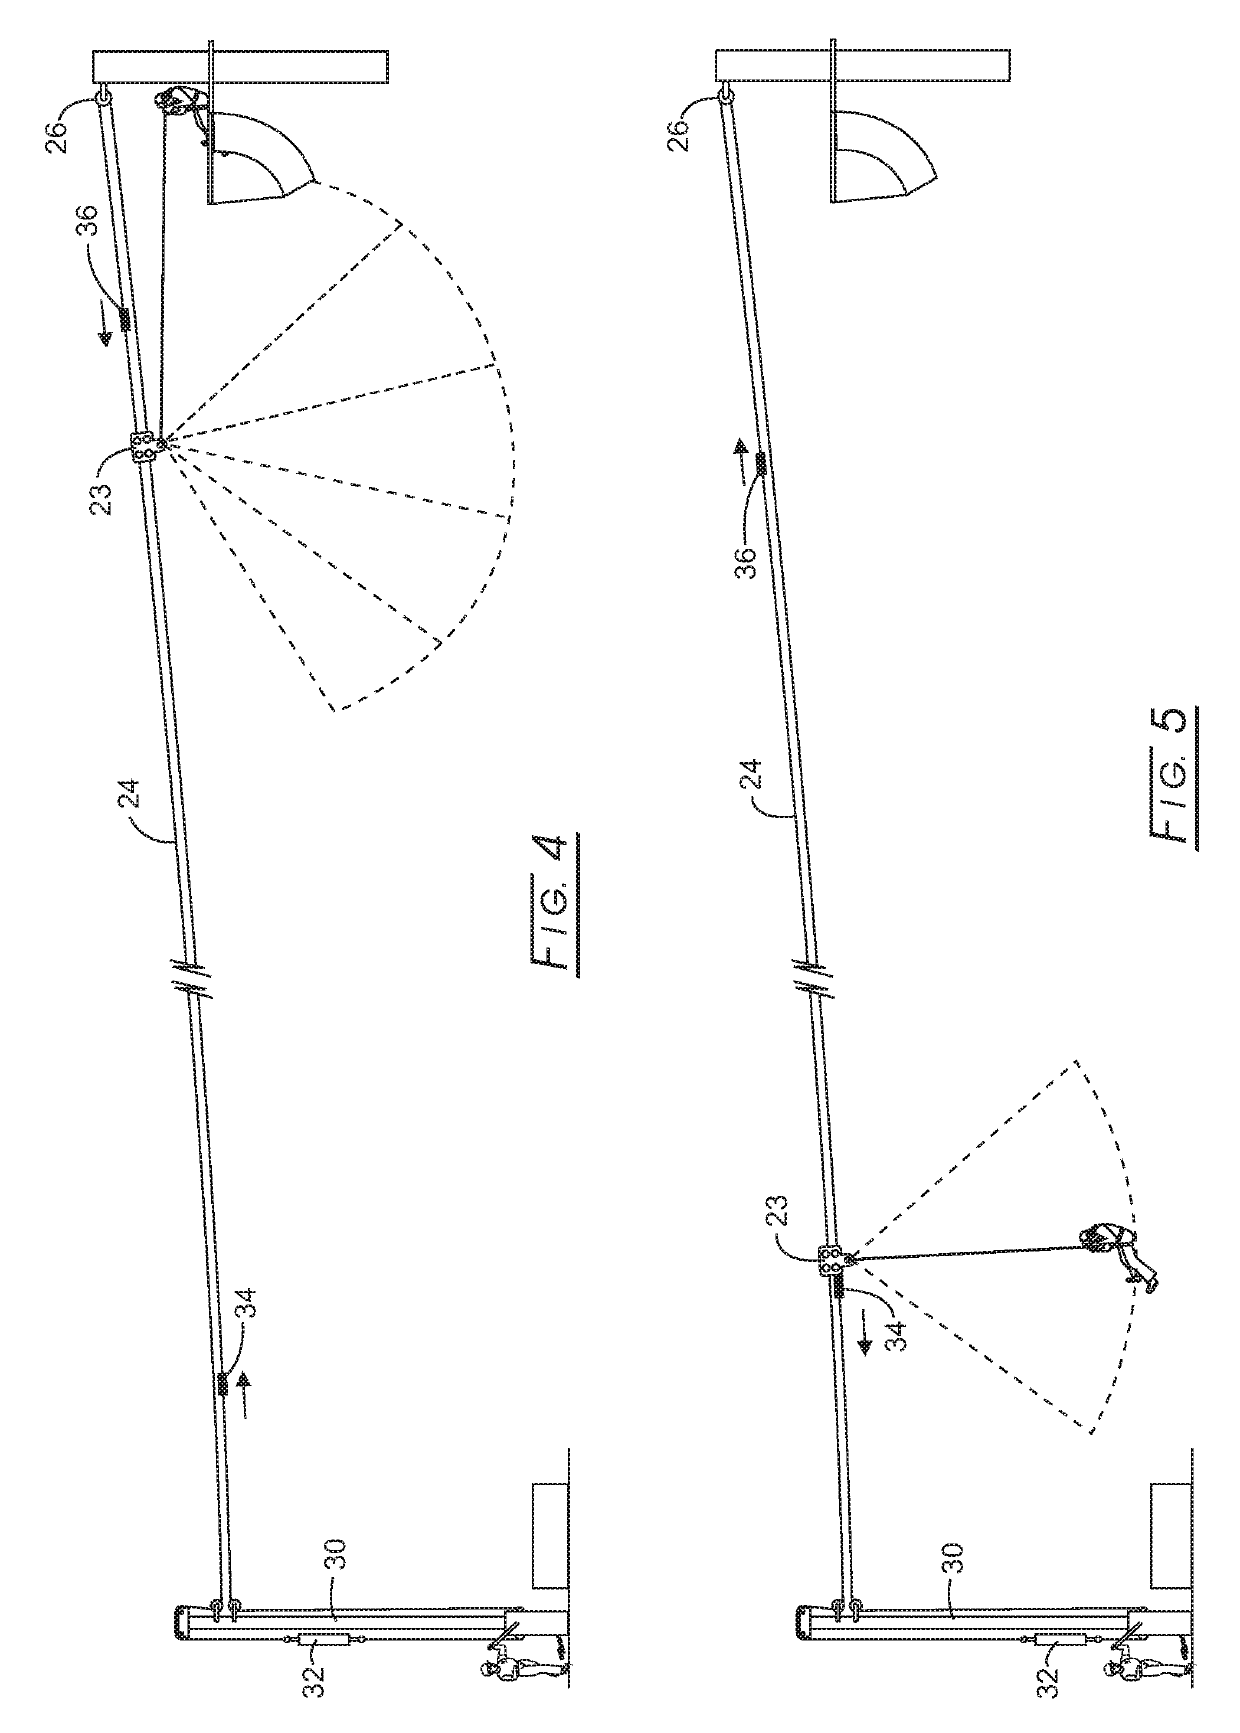 High angle tethered slide with freefall drop and variable radius swing